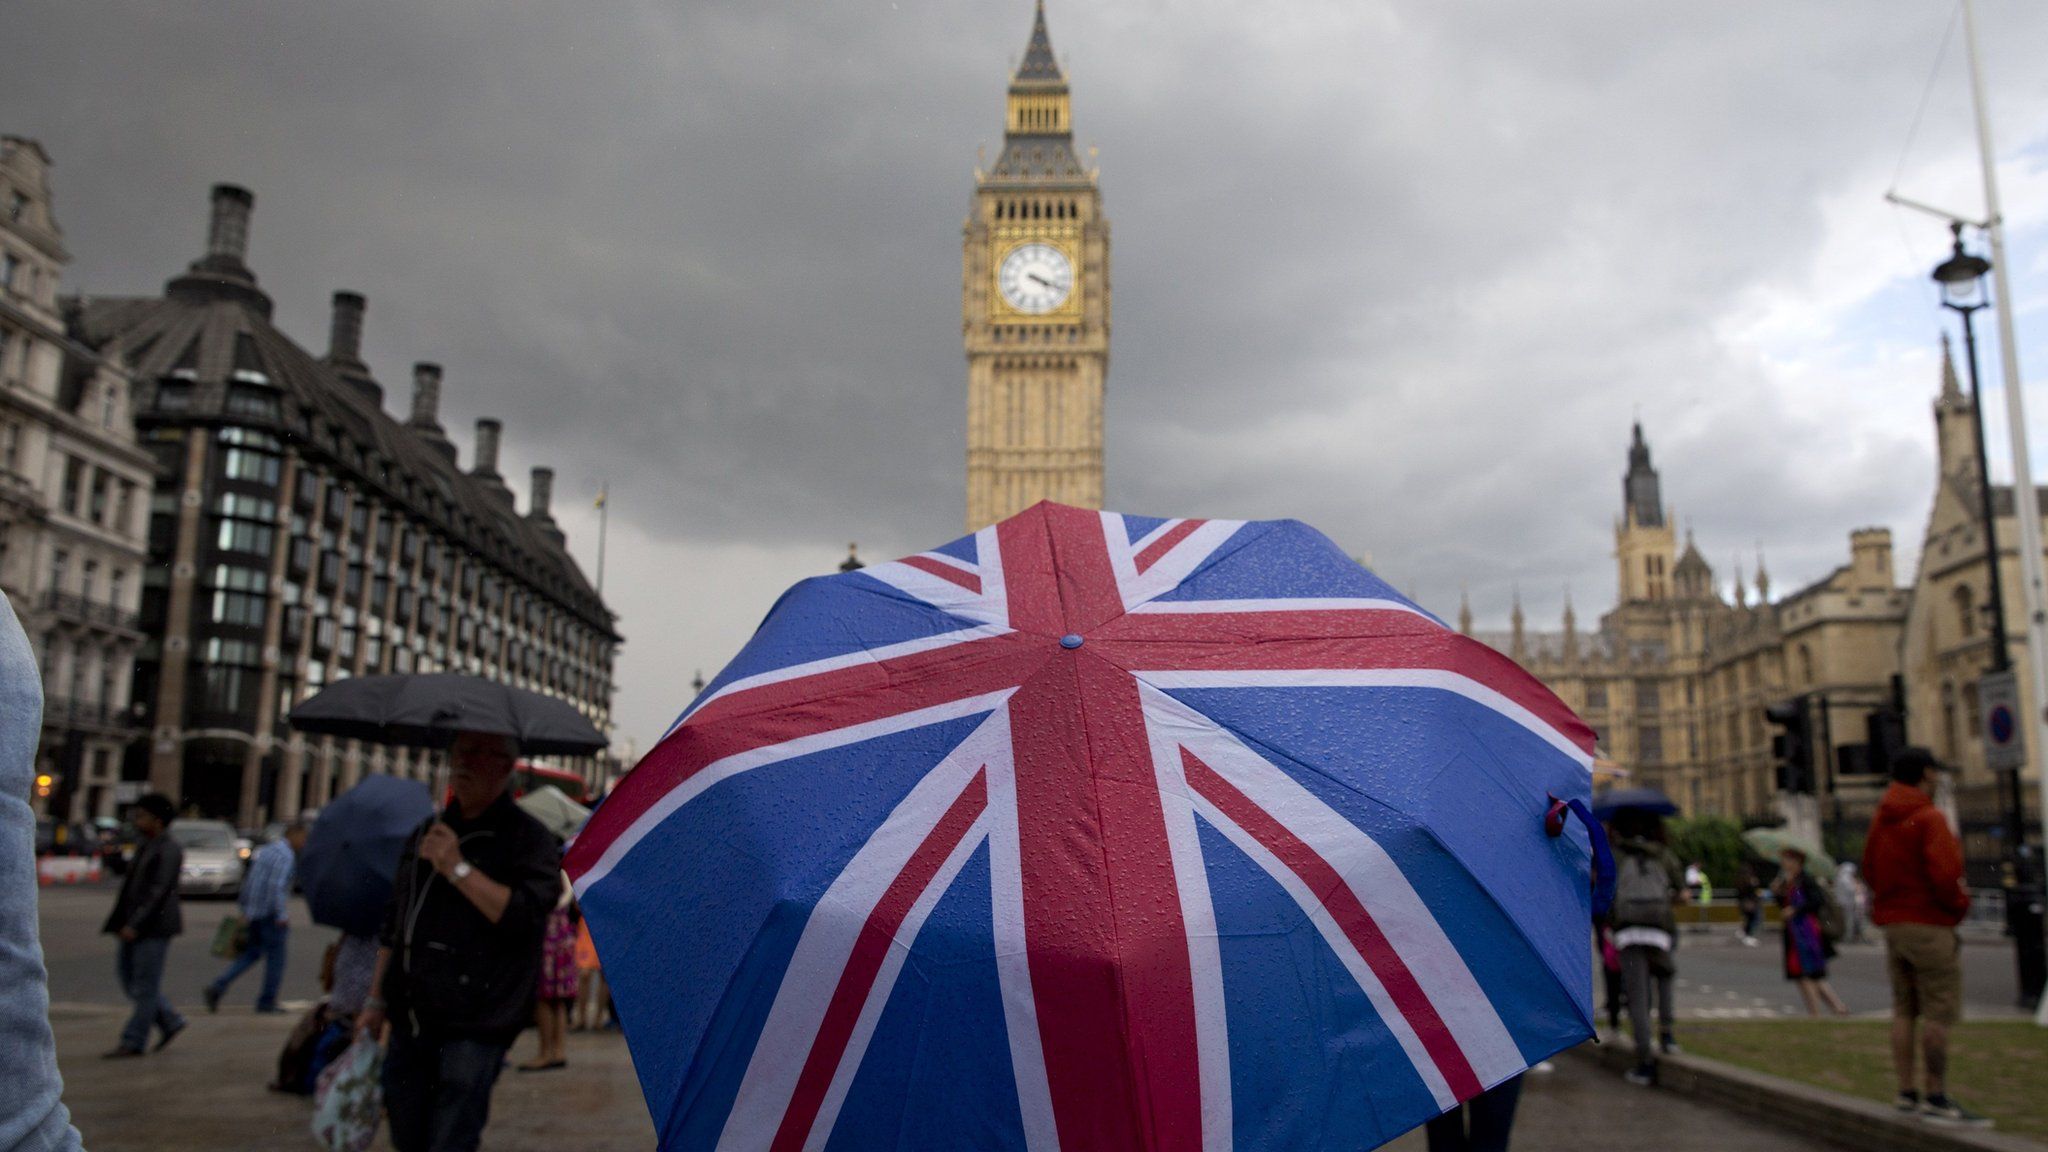 Union flag themed umbrella near Big Ben at the Houses of Parliament in central London on June 25, 2016,